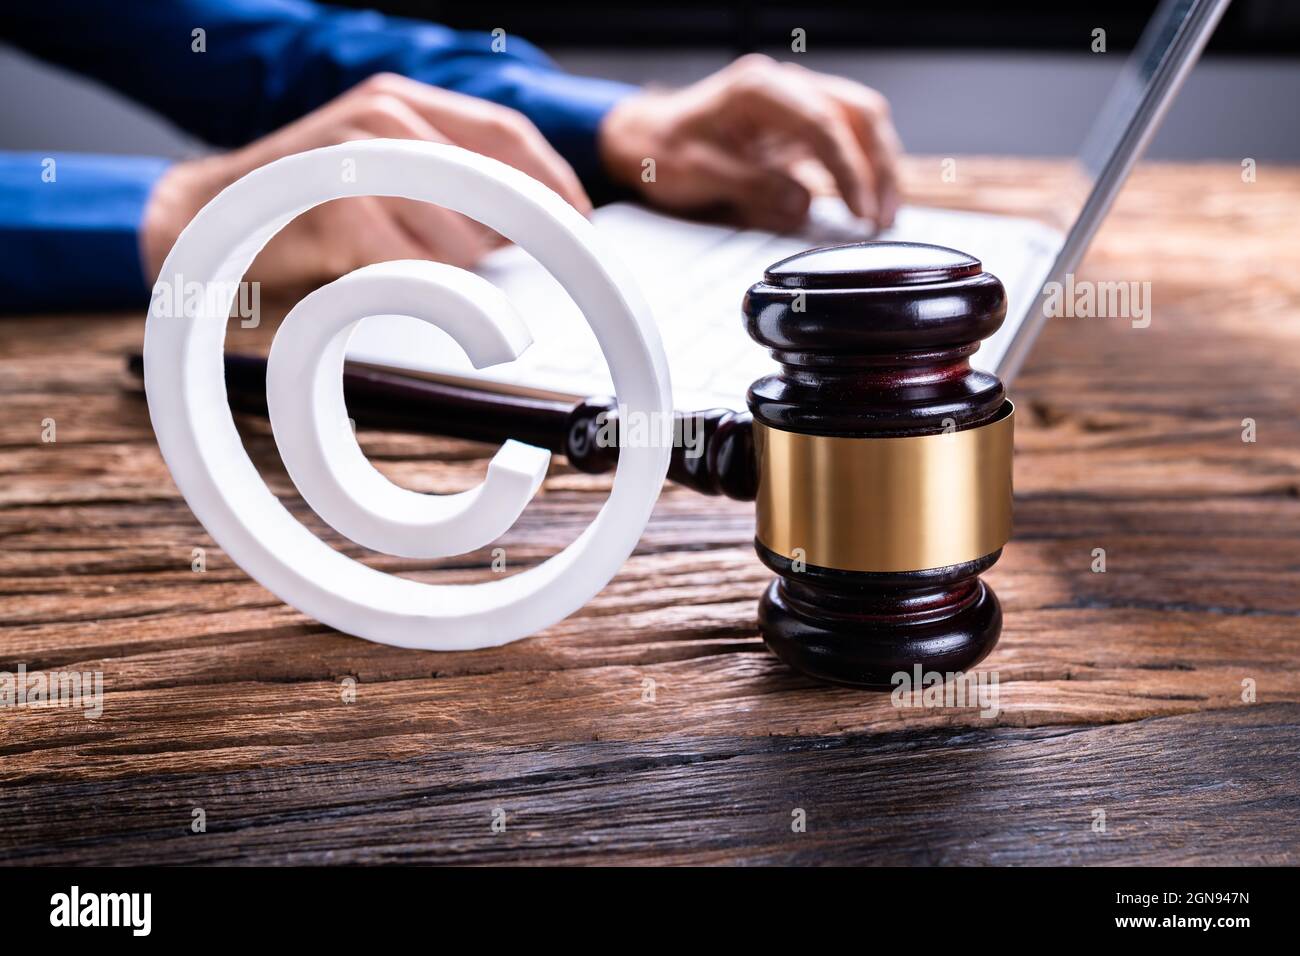 Trademark Law Brand Patent Legislation And Justice Rights Stock Photo